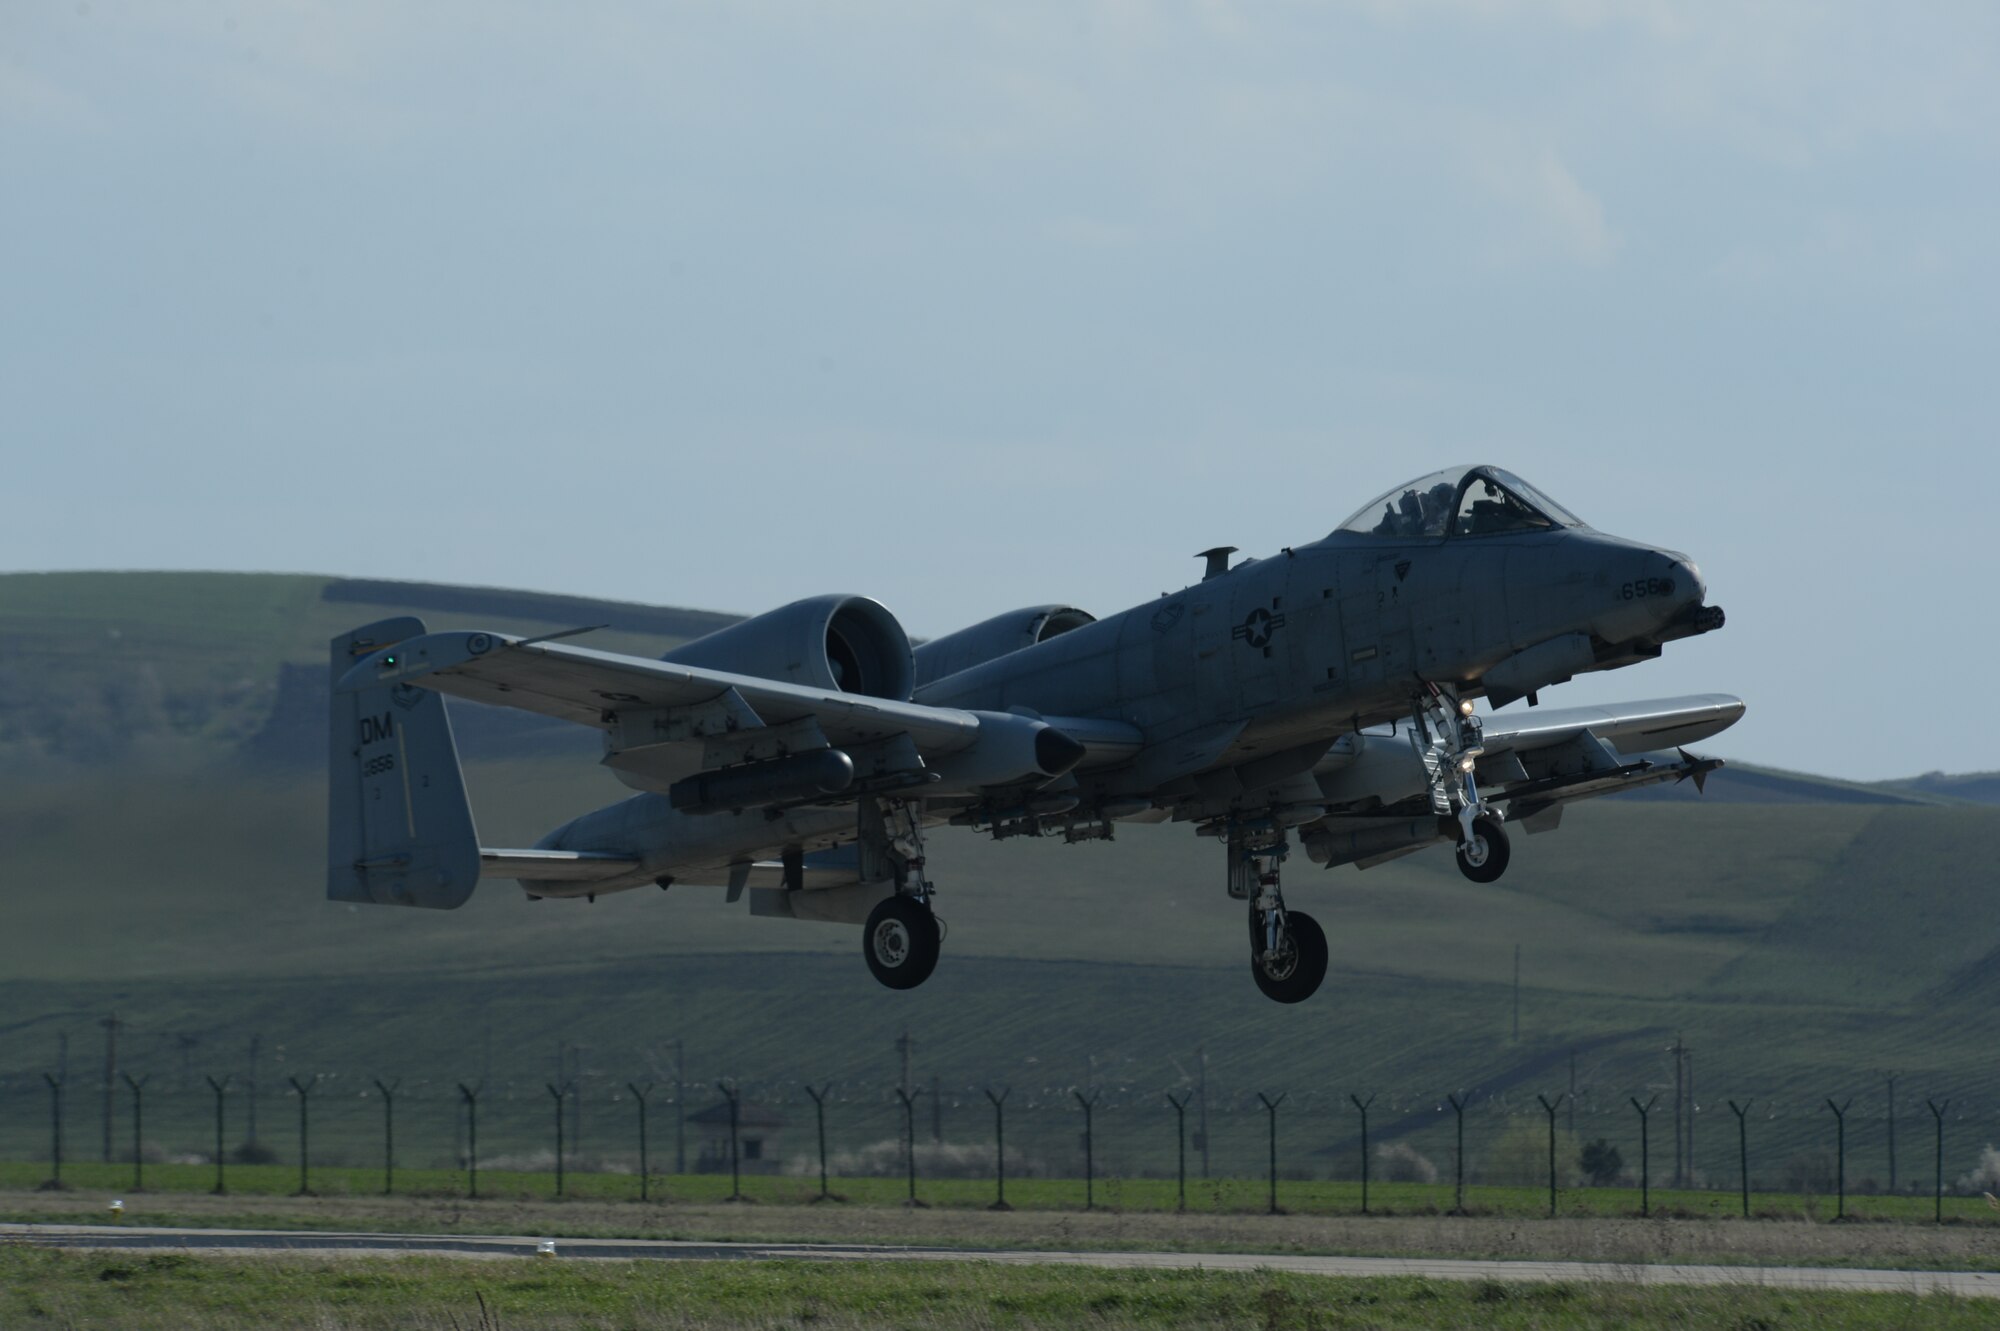 A U.S. Air Force A-10 Thunderbolt II pilot assigned to the 354th Expeditionary Fighter Squadron takes off from the flightline during a theater security package deployment at Campia Turzii, Romania, April 14, 2015.U.S. Airmen will conduct training alongside NATO allies to strengthen interoperability and demonstrate U.S. commitment to the security and stability of Europe.  (U.S. Air Force photo by Staff Sgt. Joe W. McFadden/Released)